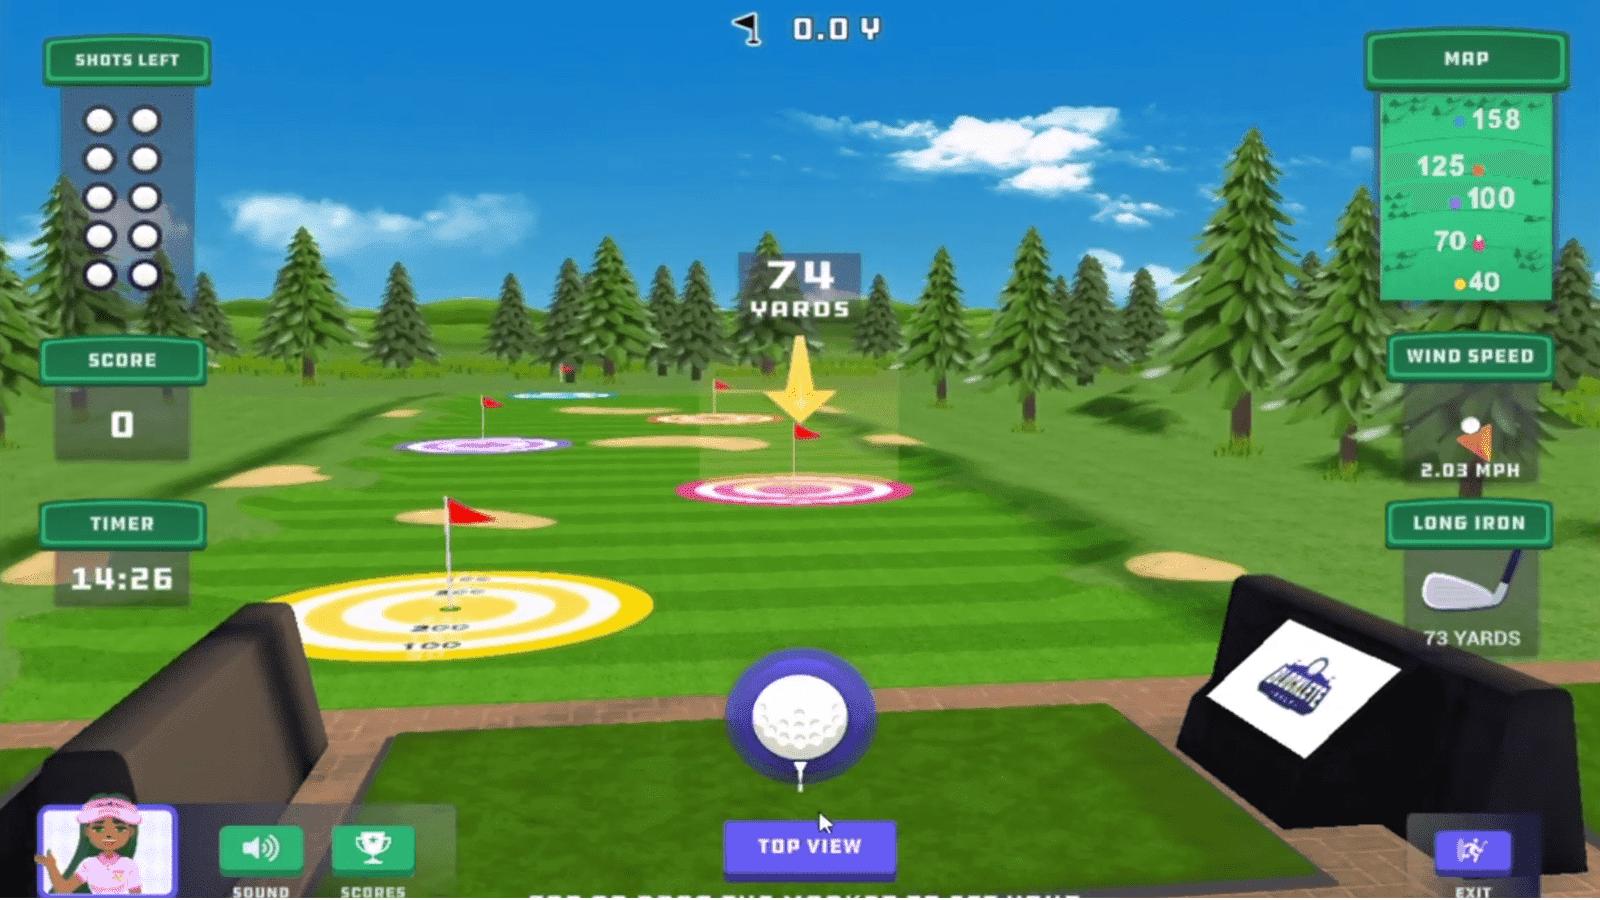 You can buy a golfer, which is a ethereum NFT, from another player or from the marketplace in Blocklete Golf.